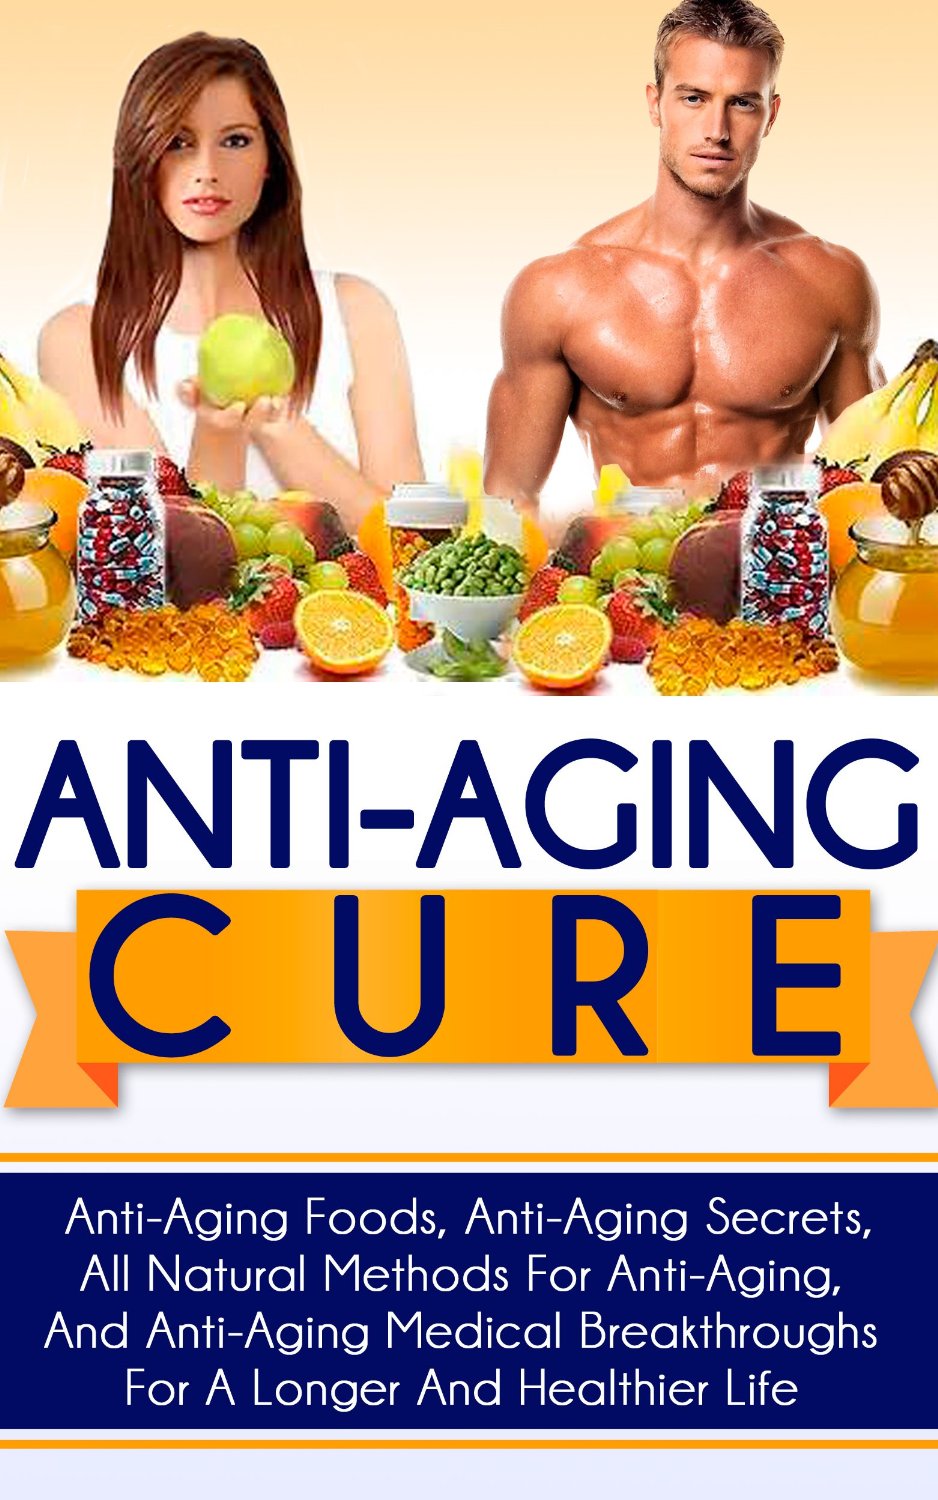 Anti-Aging Cure by Ace McCloud